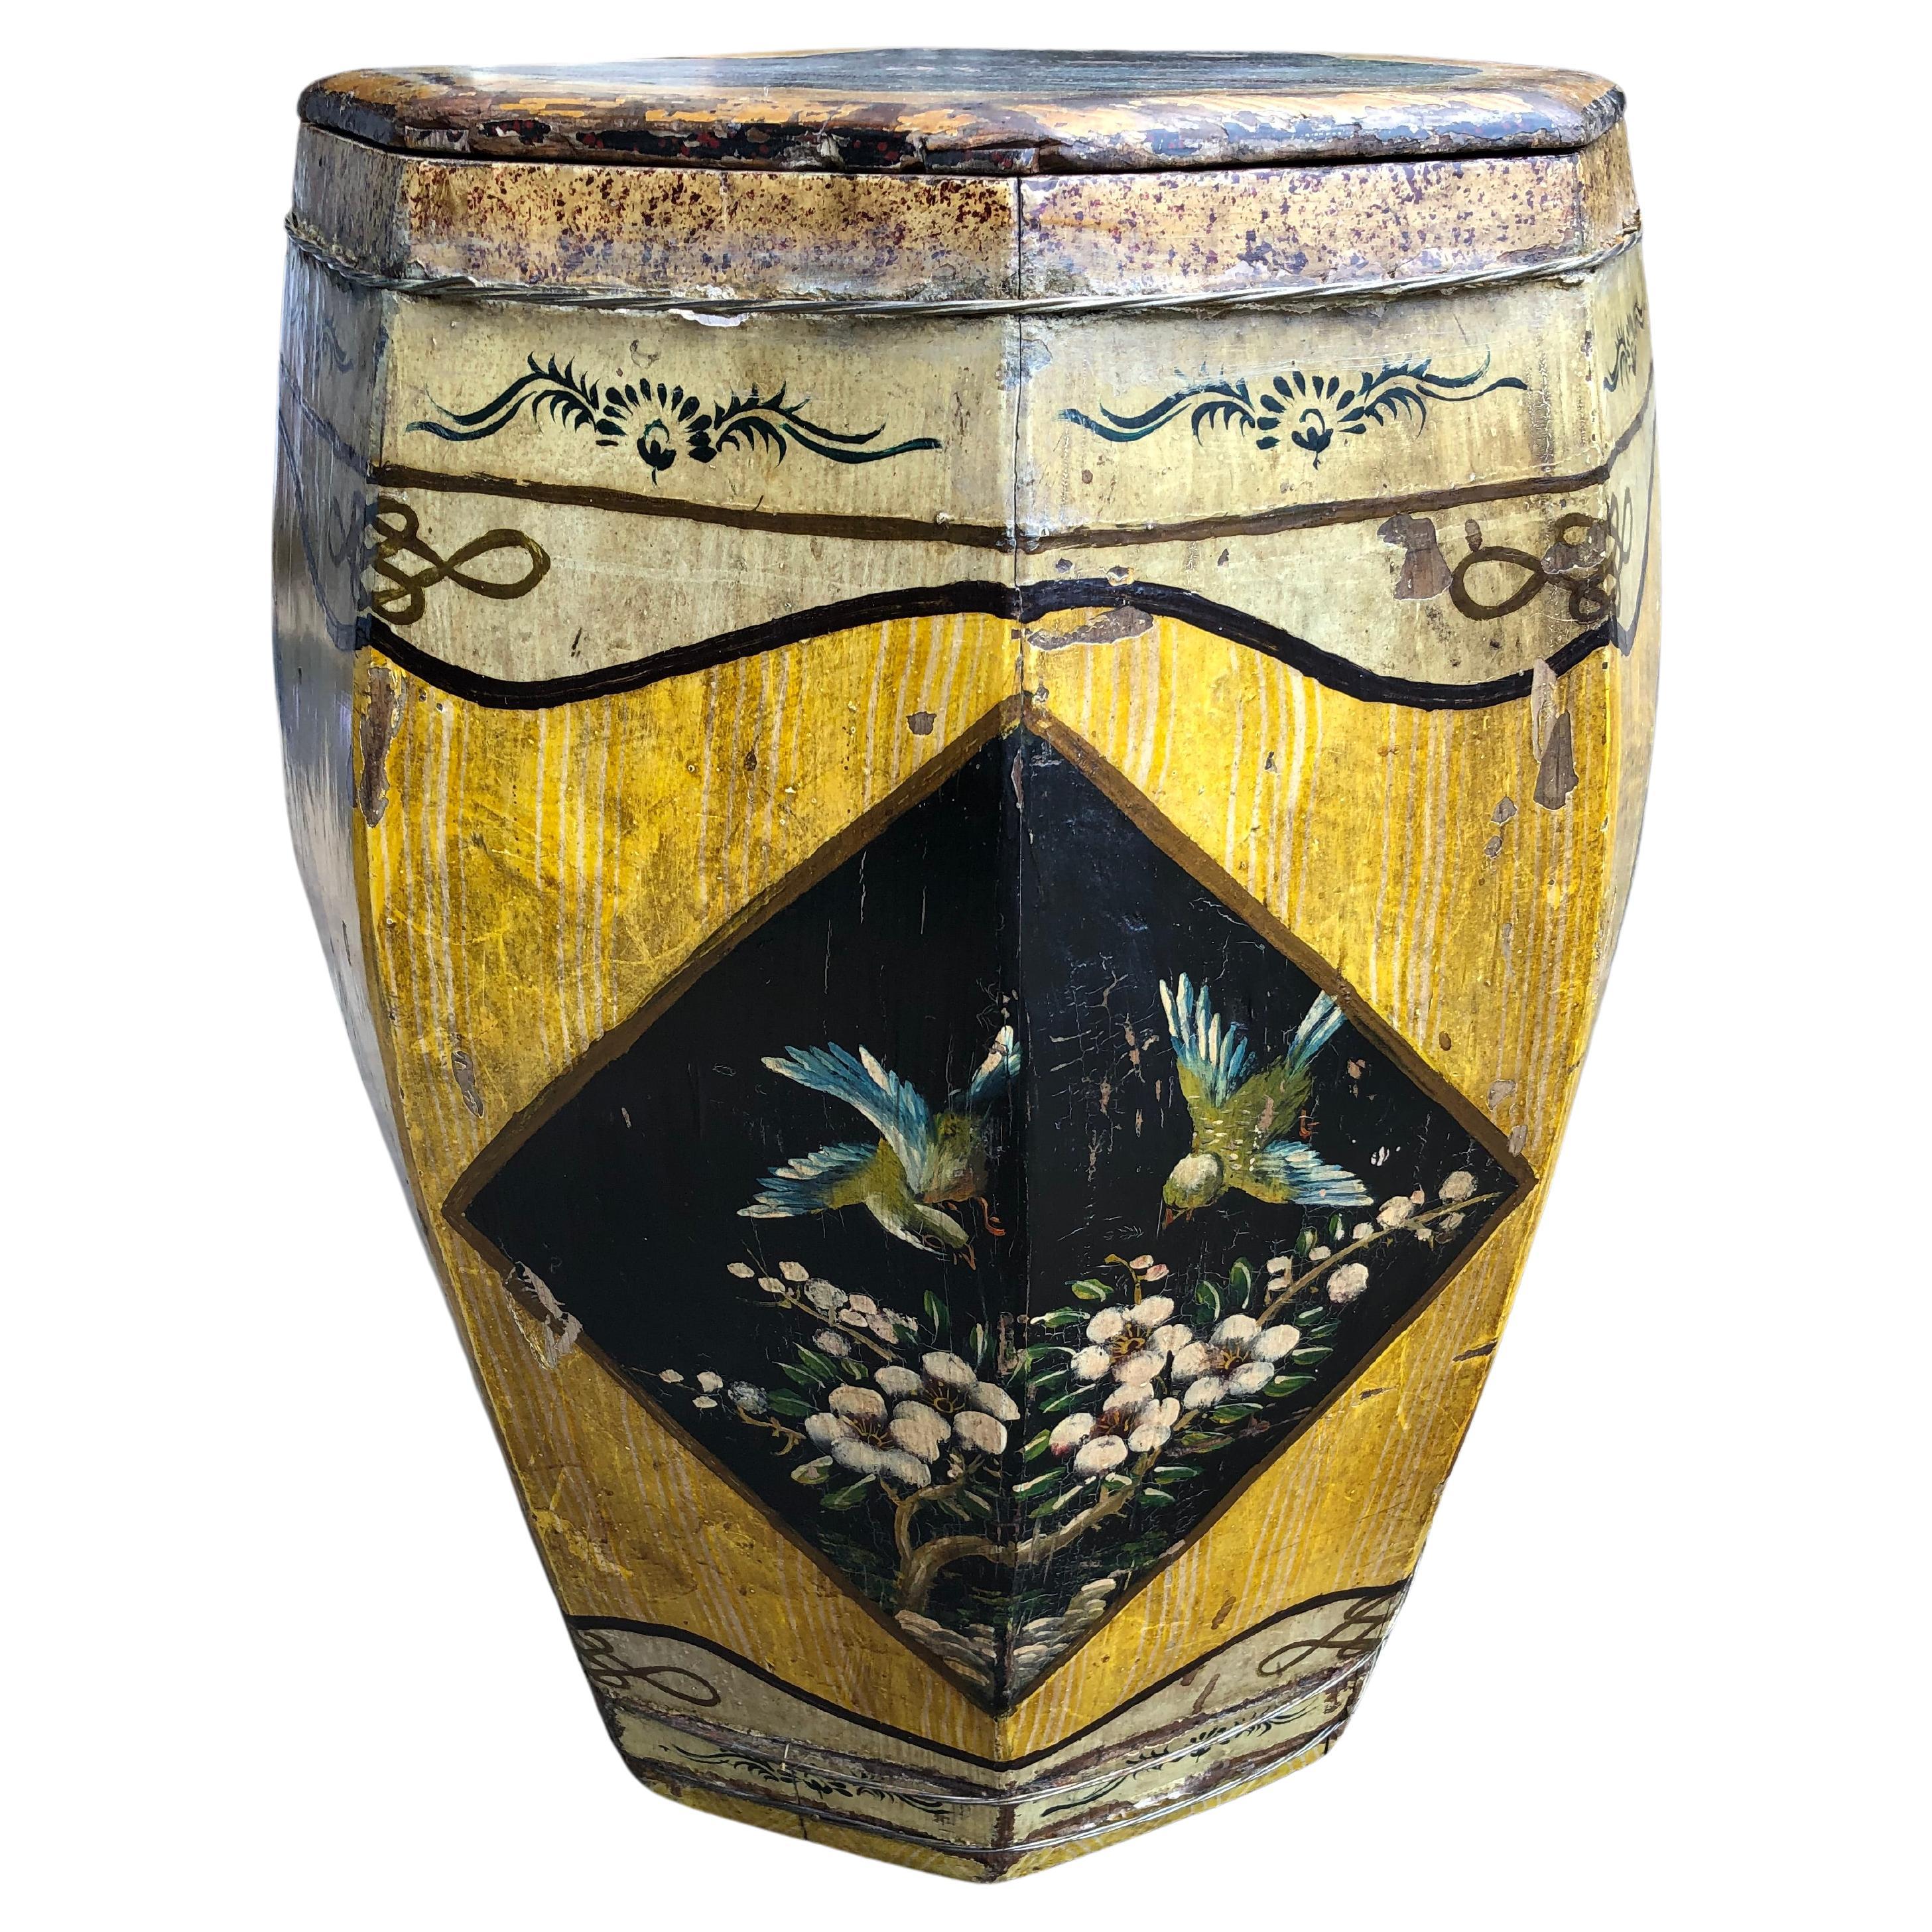 Charming Rare Round Wooden Rice Bin End Table